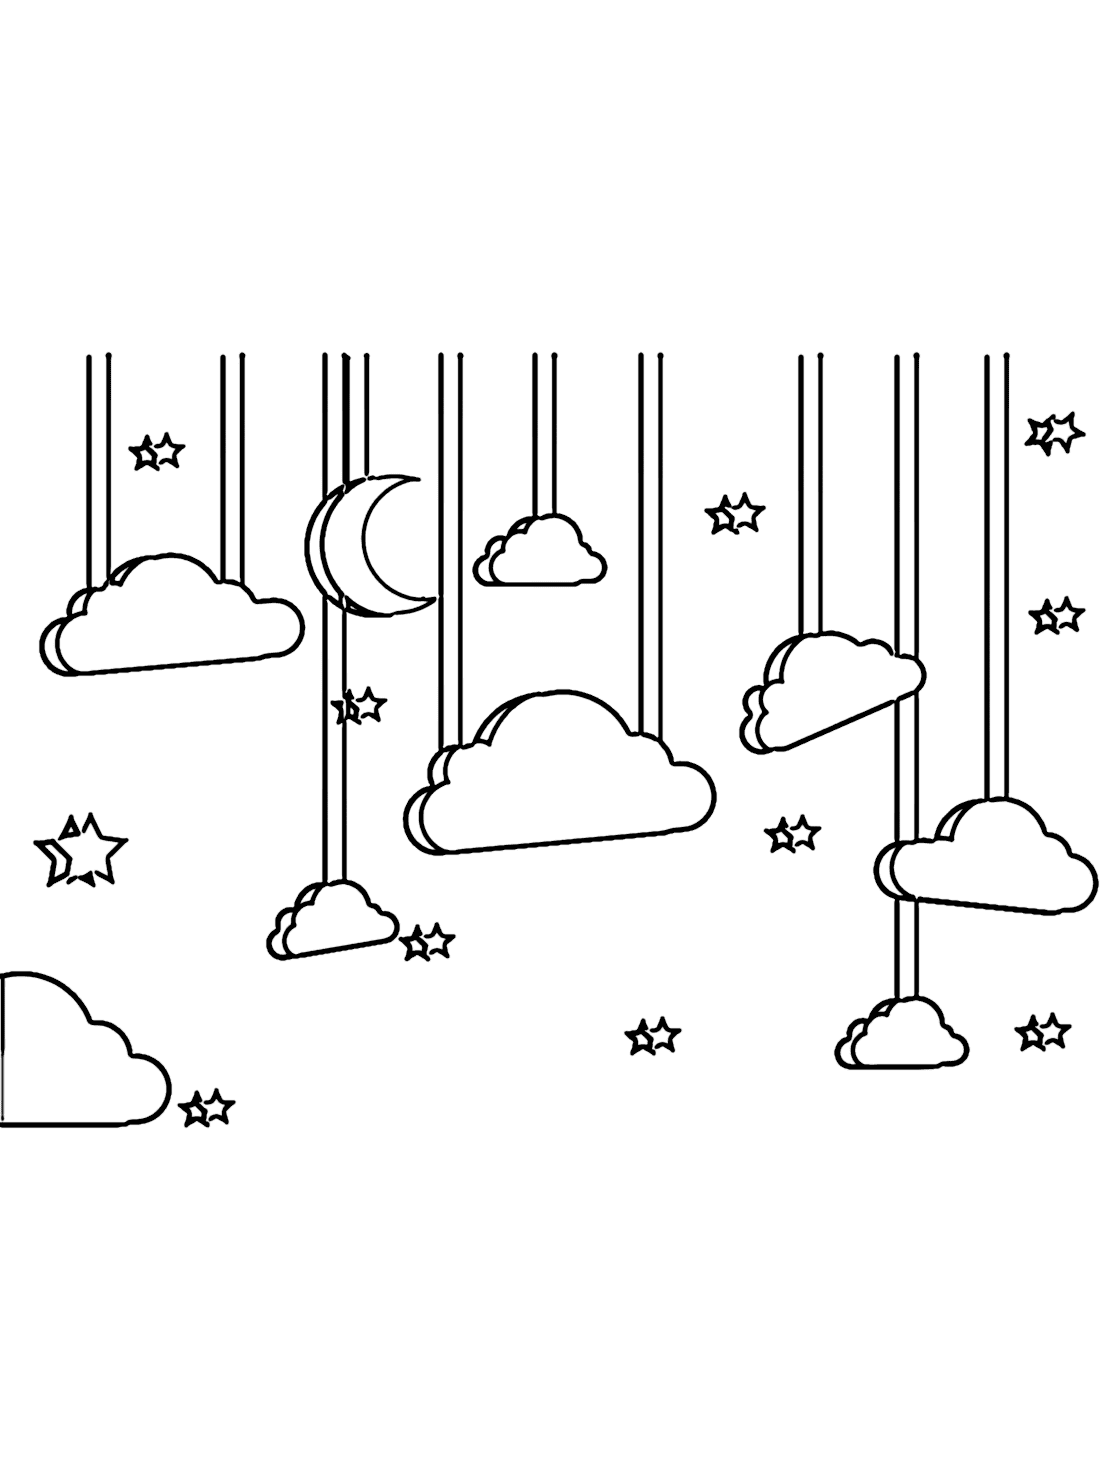 Night sky background coloring pages